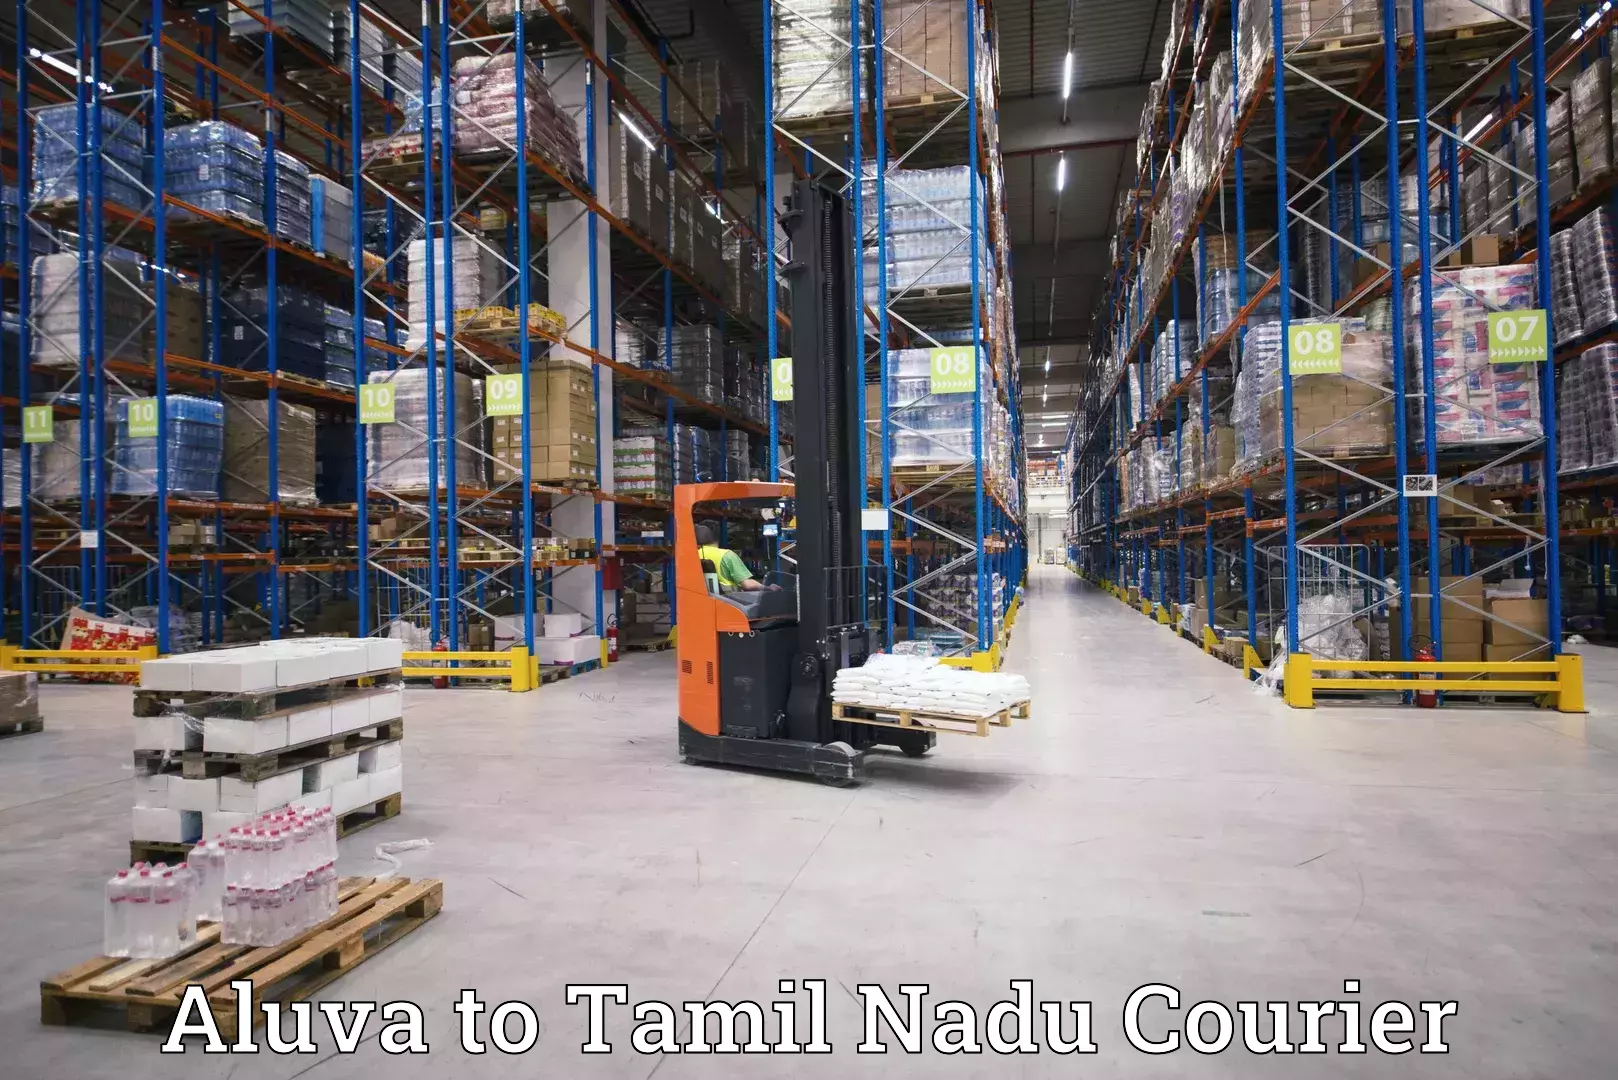 Tech-enabled shipping Aluva to Ennore Port Chennai